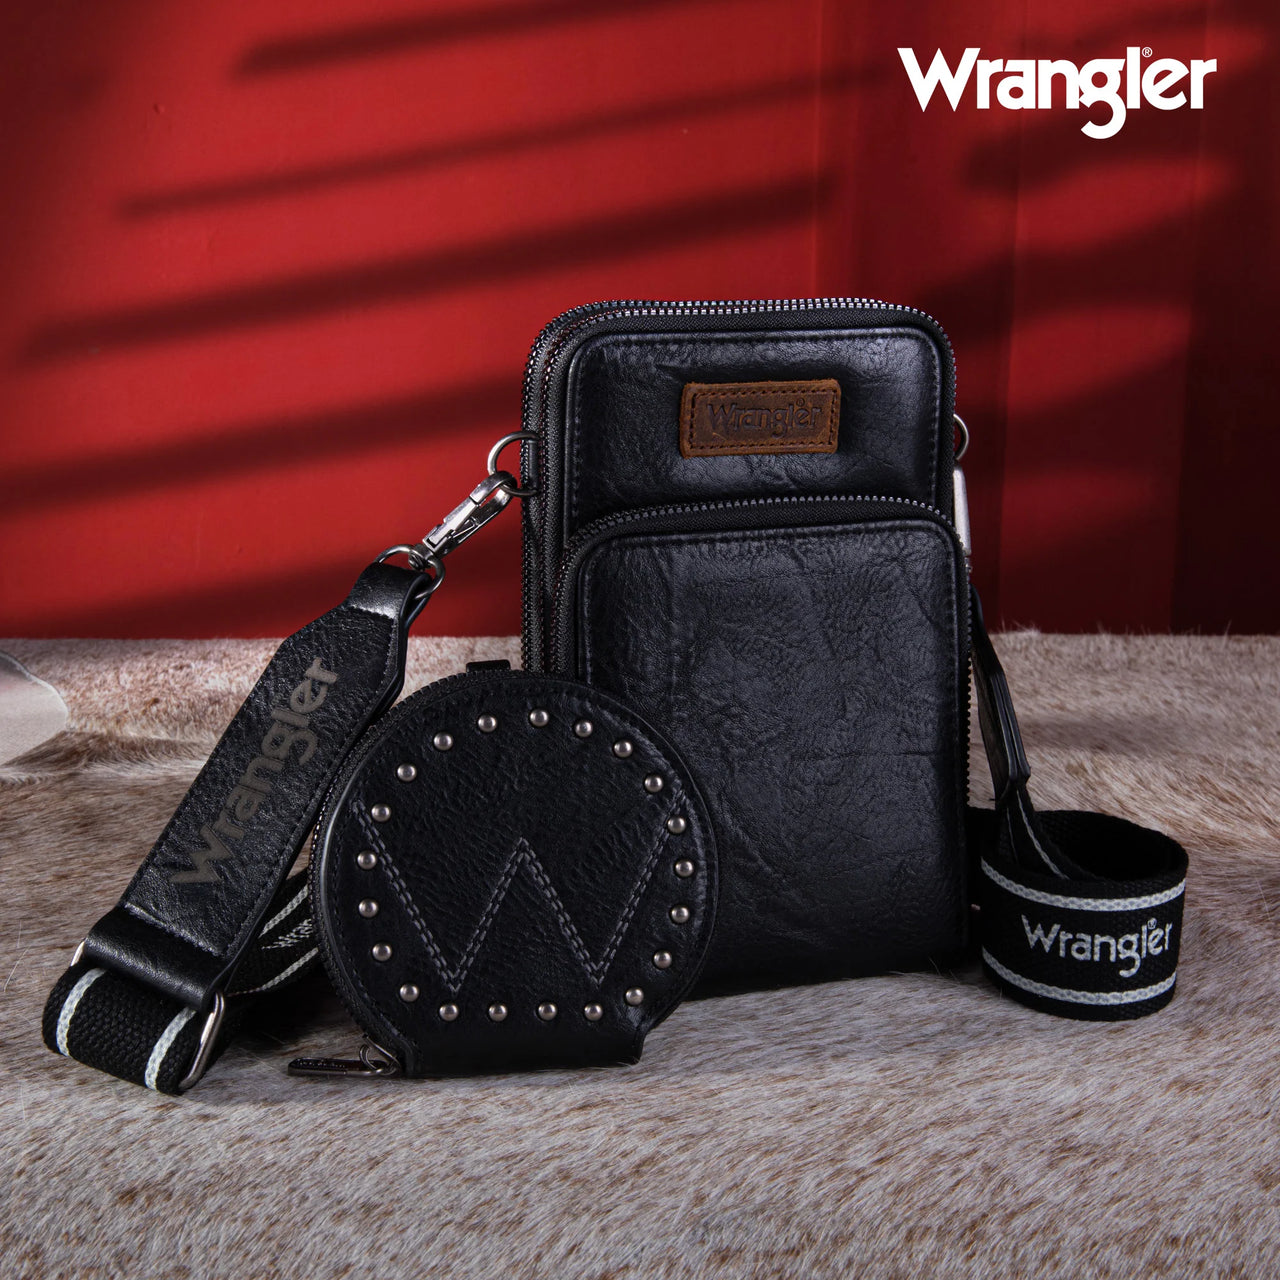 Wrangler Women's Crossbody Cell Phone Phase 3 Zipper Compartment w/Coin Pouch - Black